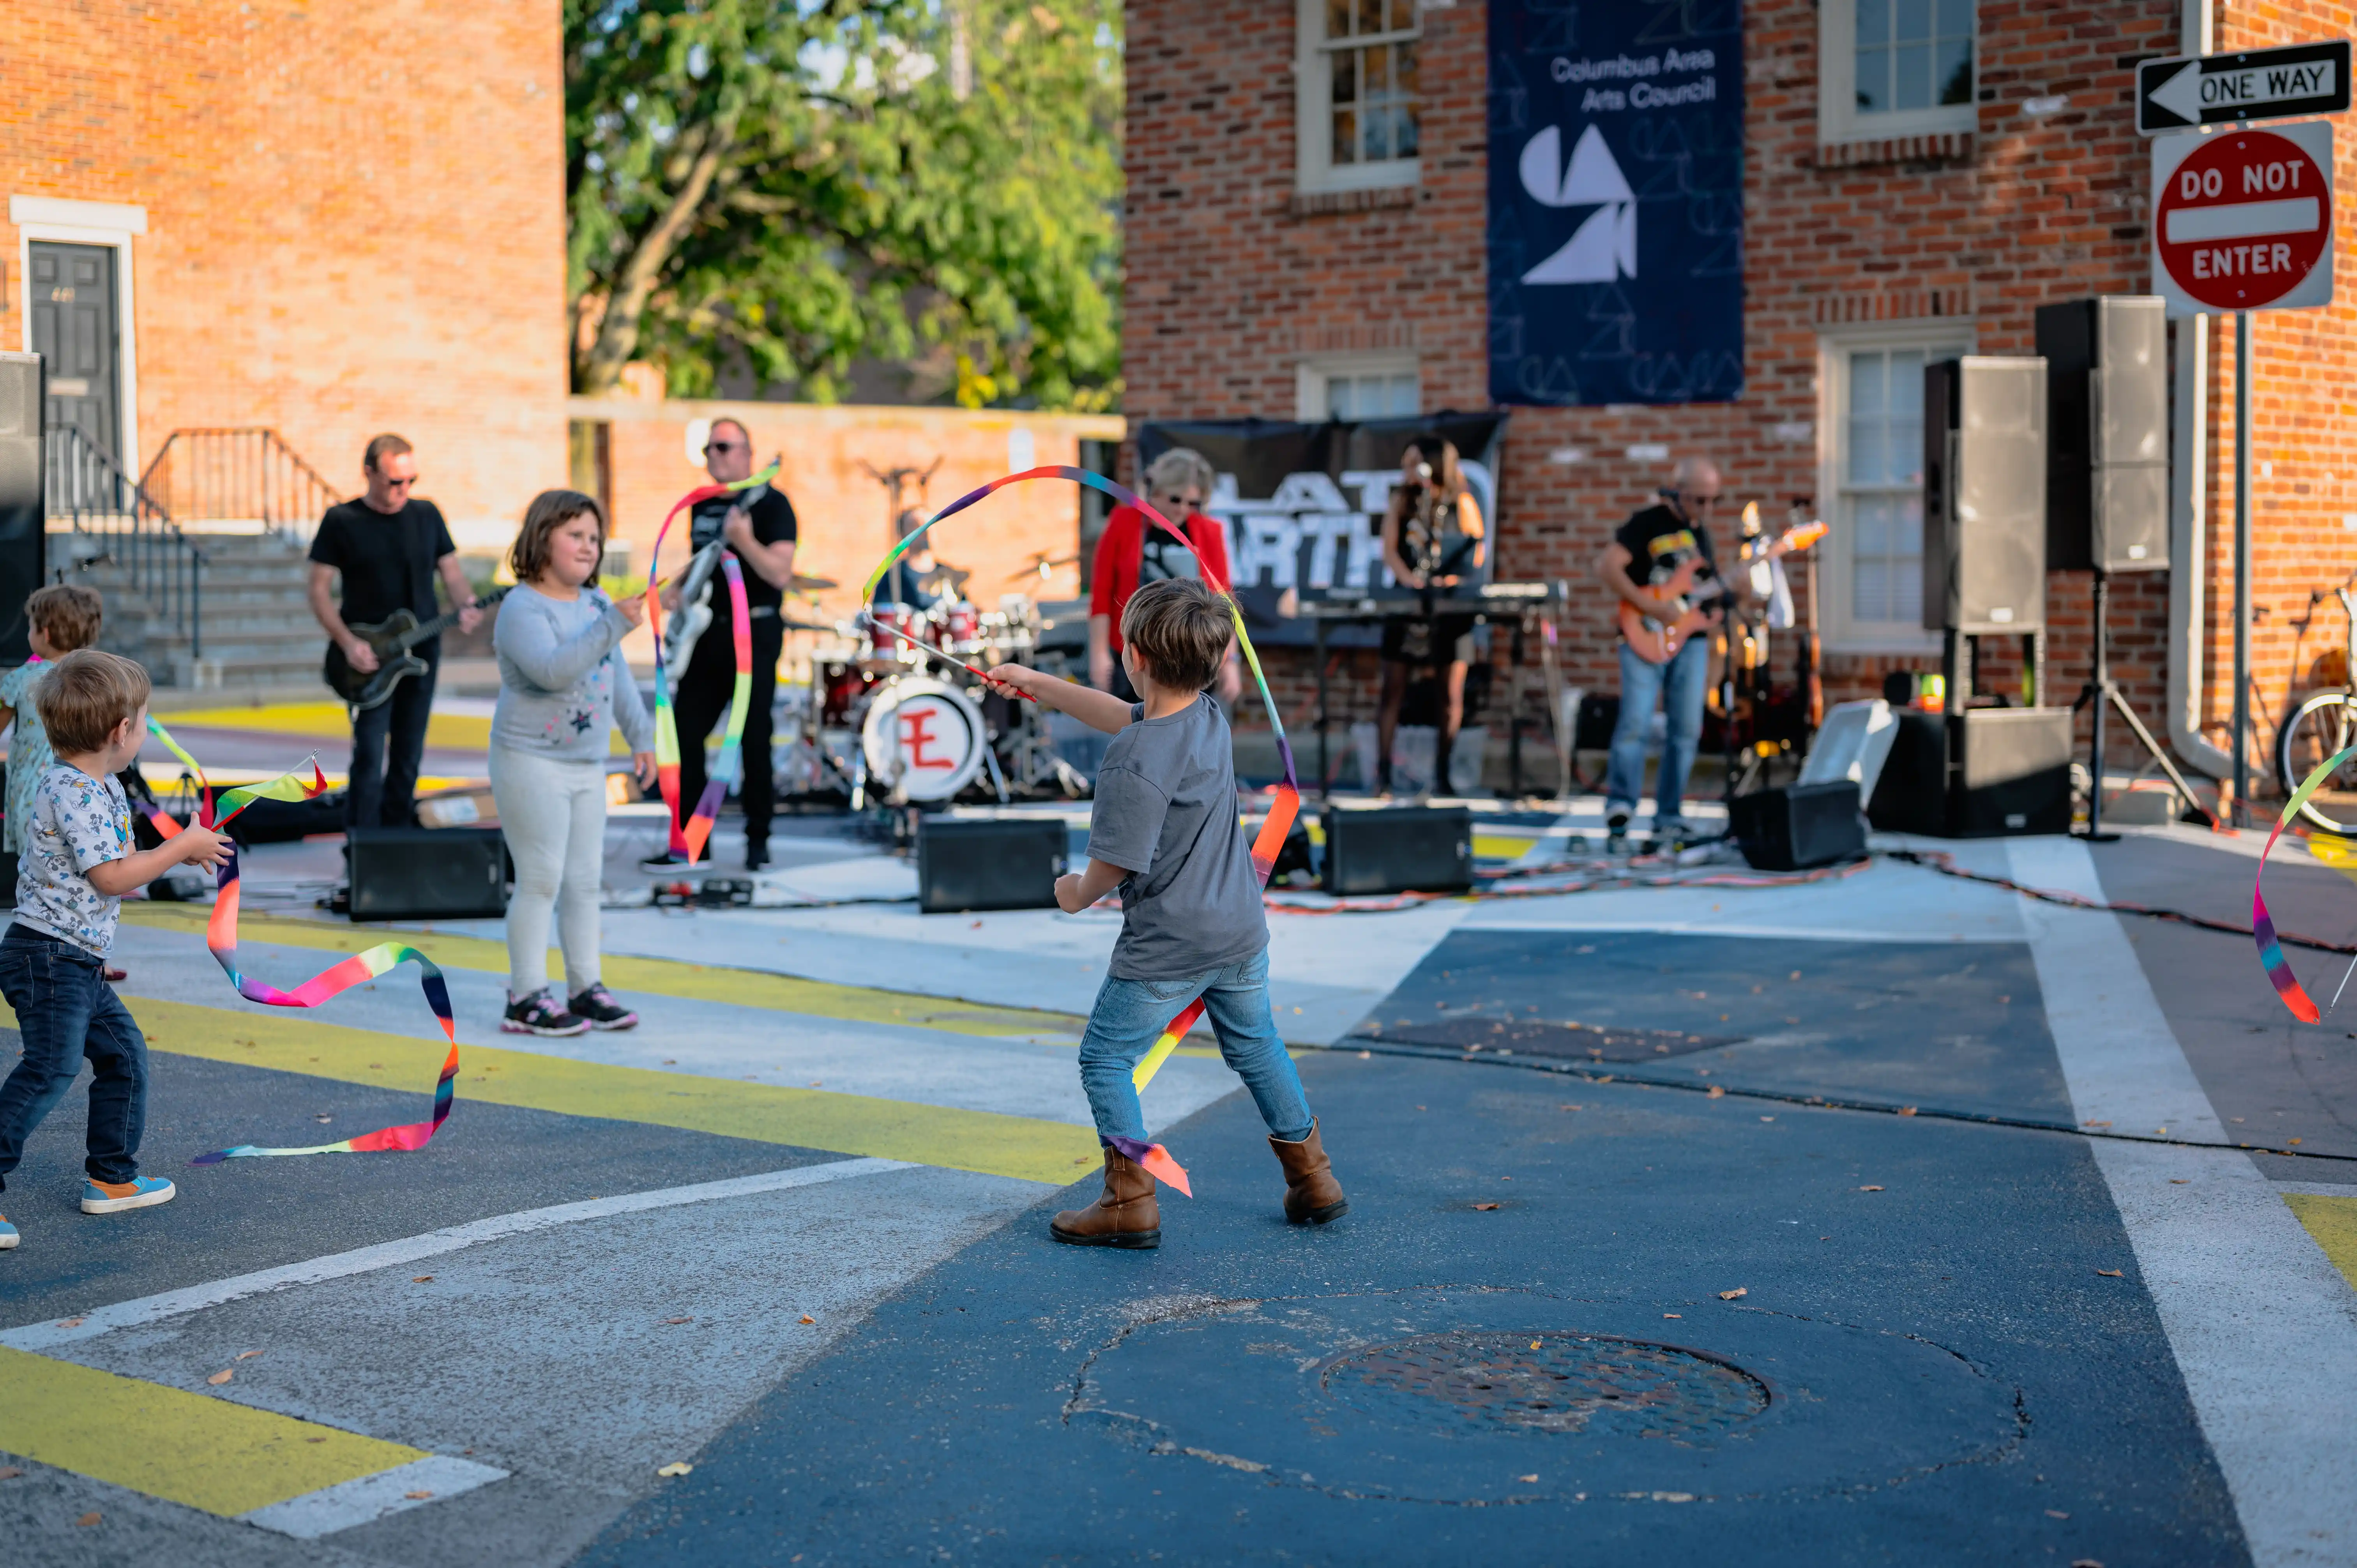 Children playing with hula hoops on a street at an outdoor event with a live band performing in the background.